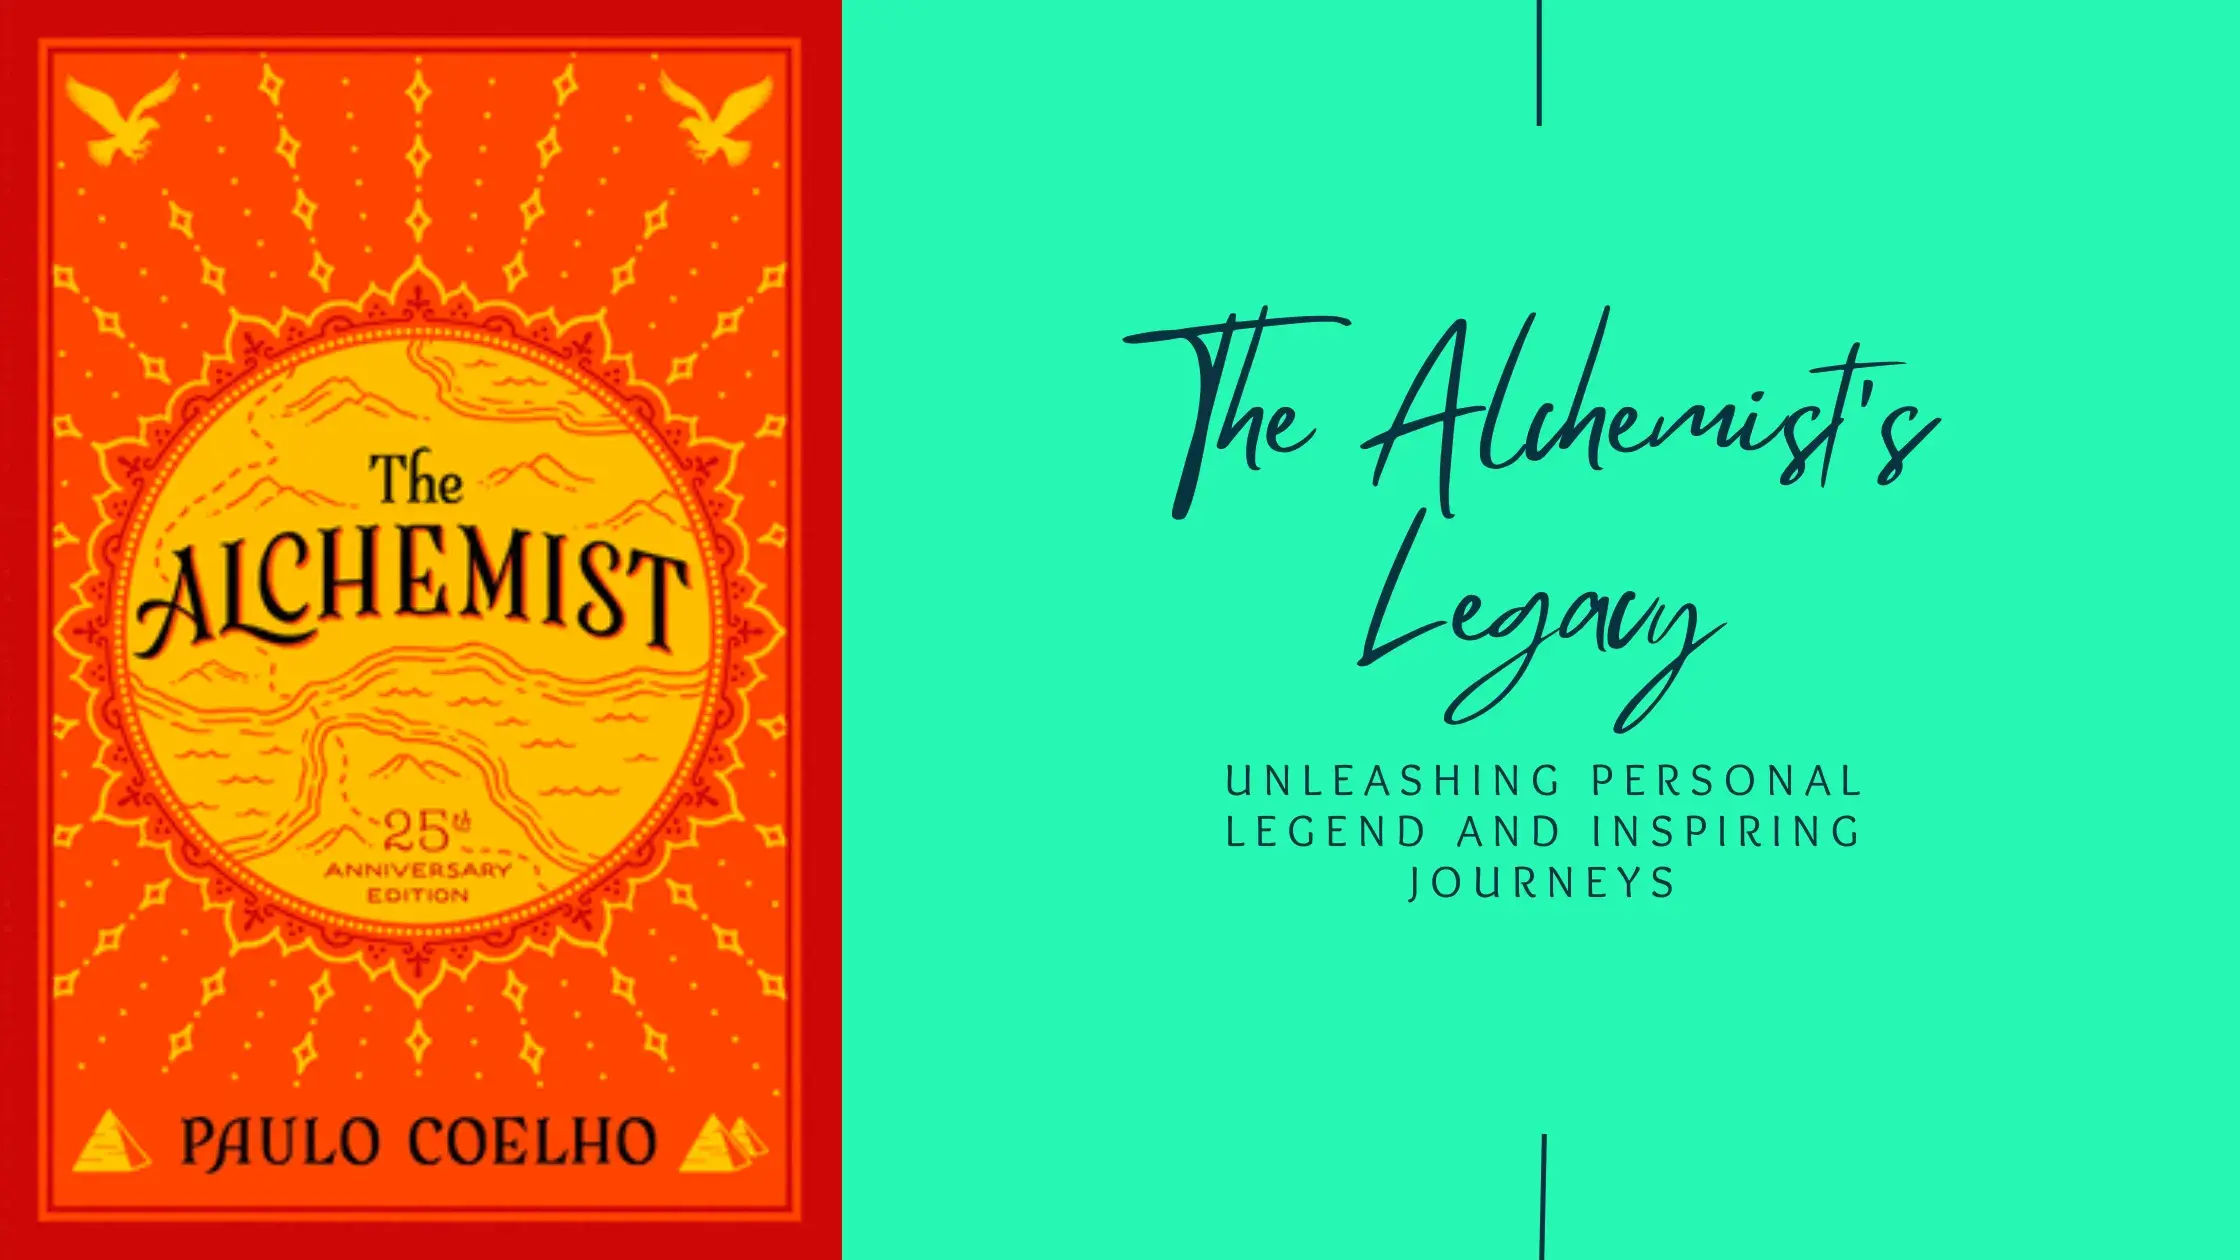 The Alchemist's Legacy: Unleashing Personal Legend and Inspiring Journeys